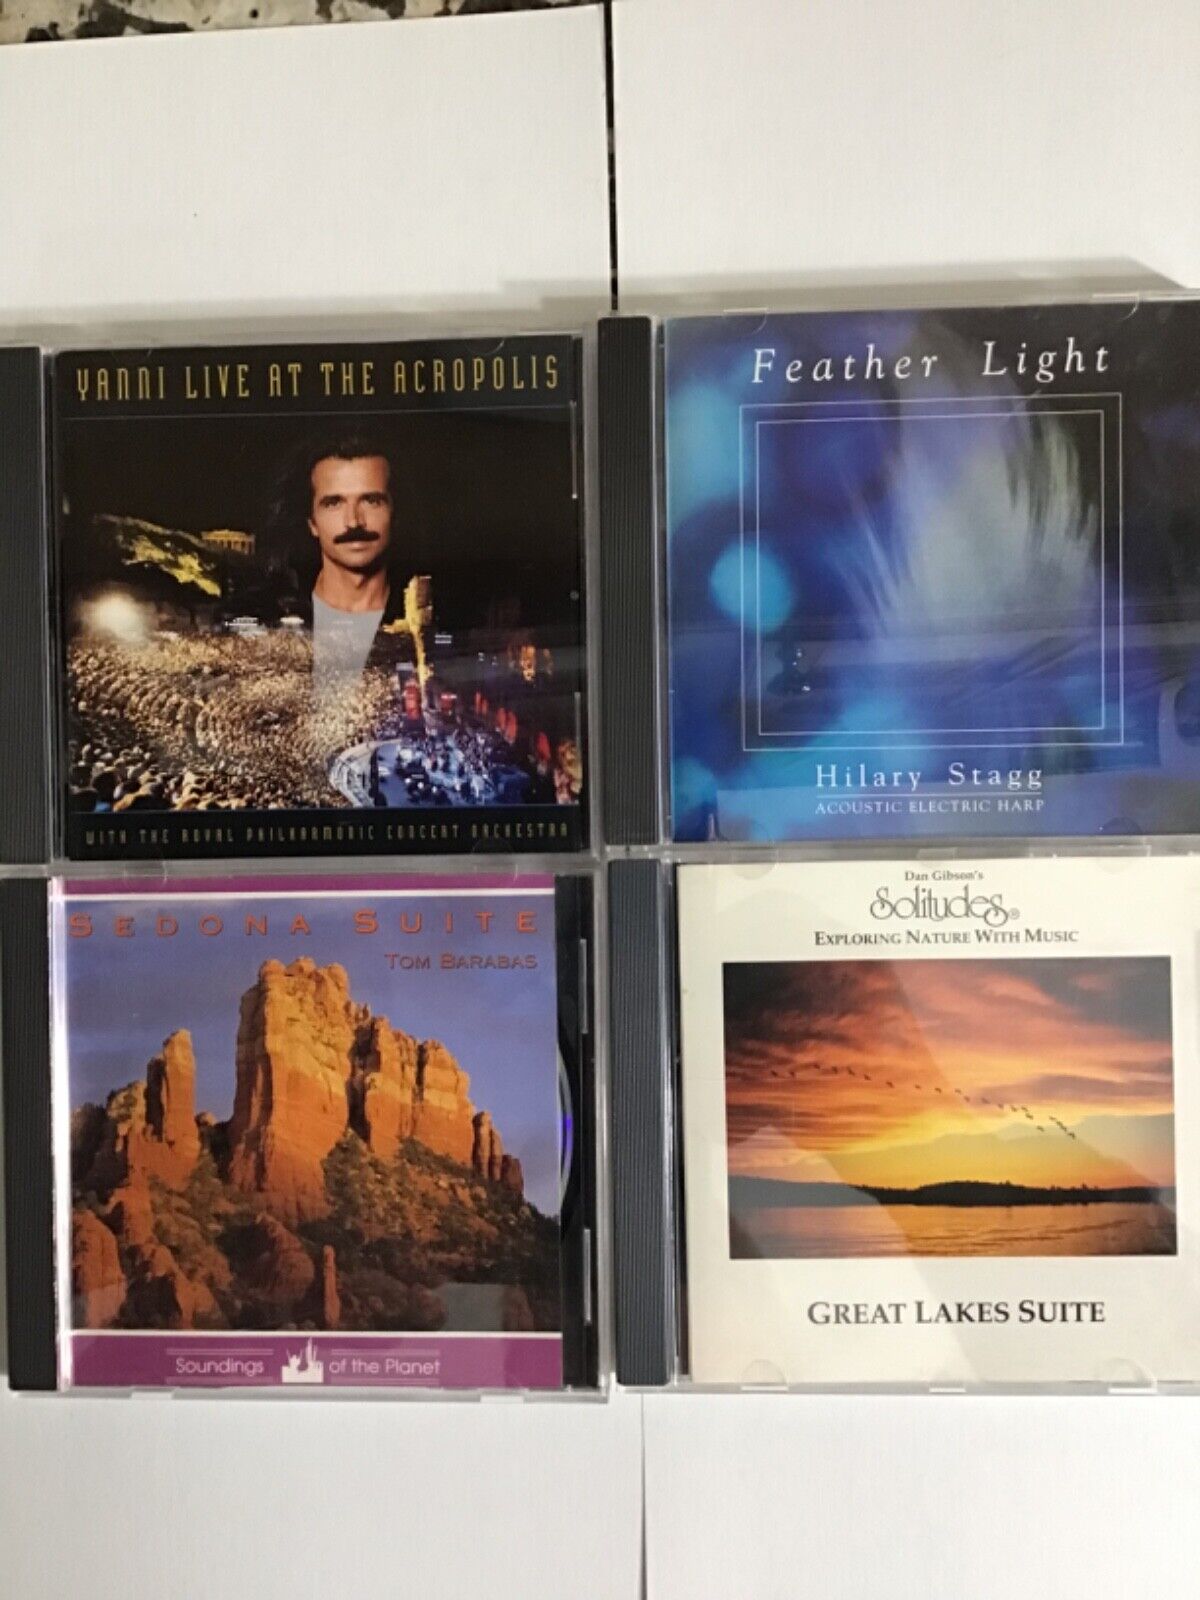 Lot of 4 Easy Listening CDs by Yanni, Hilary Stagg, Tom Barabas, and Dan Gibson